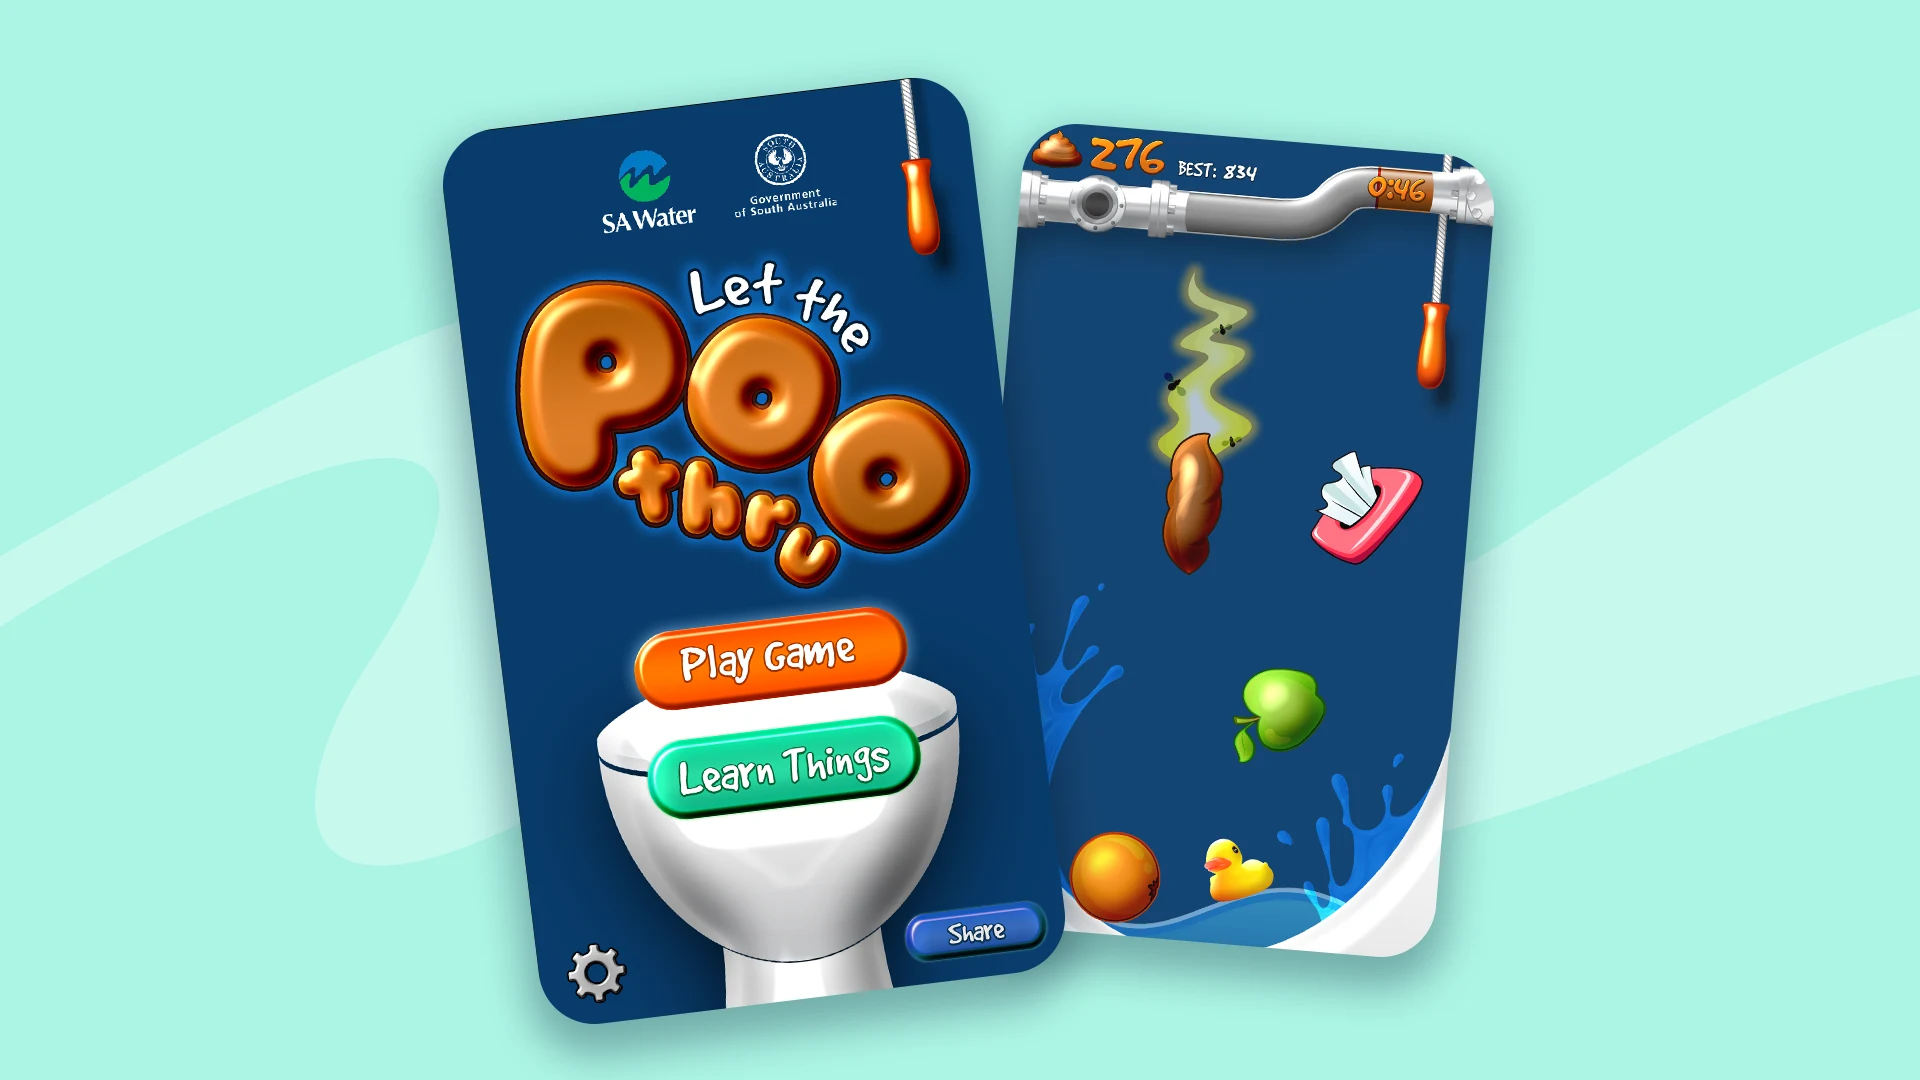 Let the Poo Thru game app preview